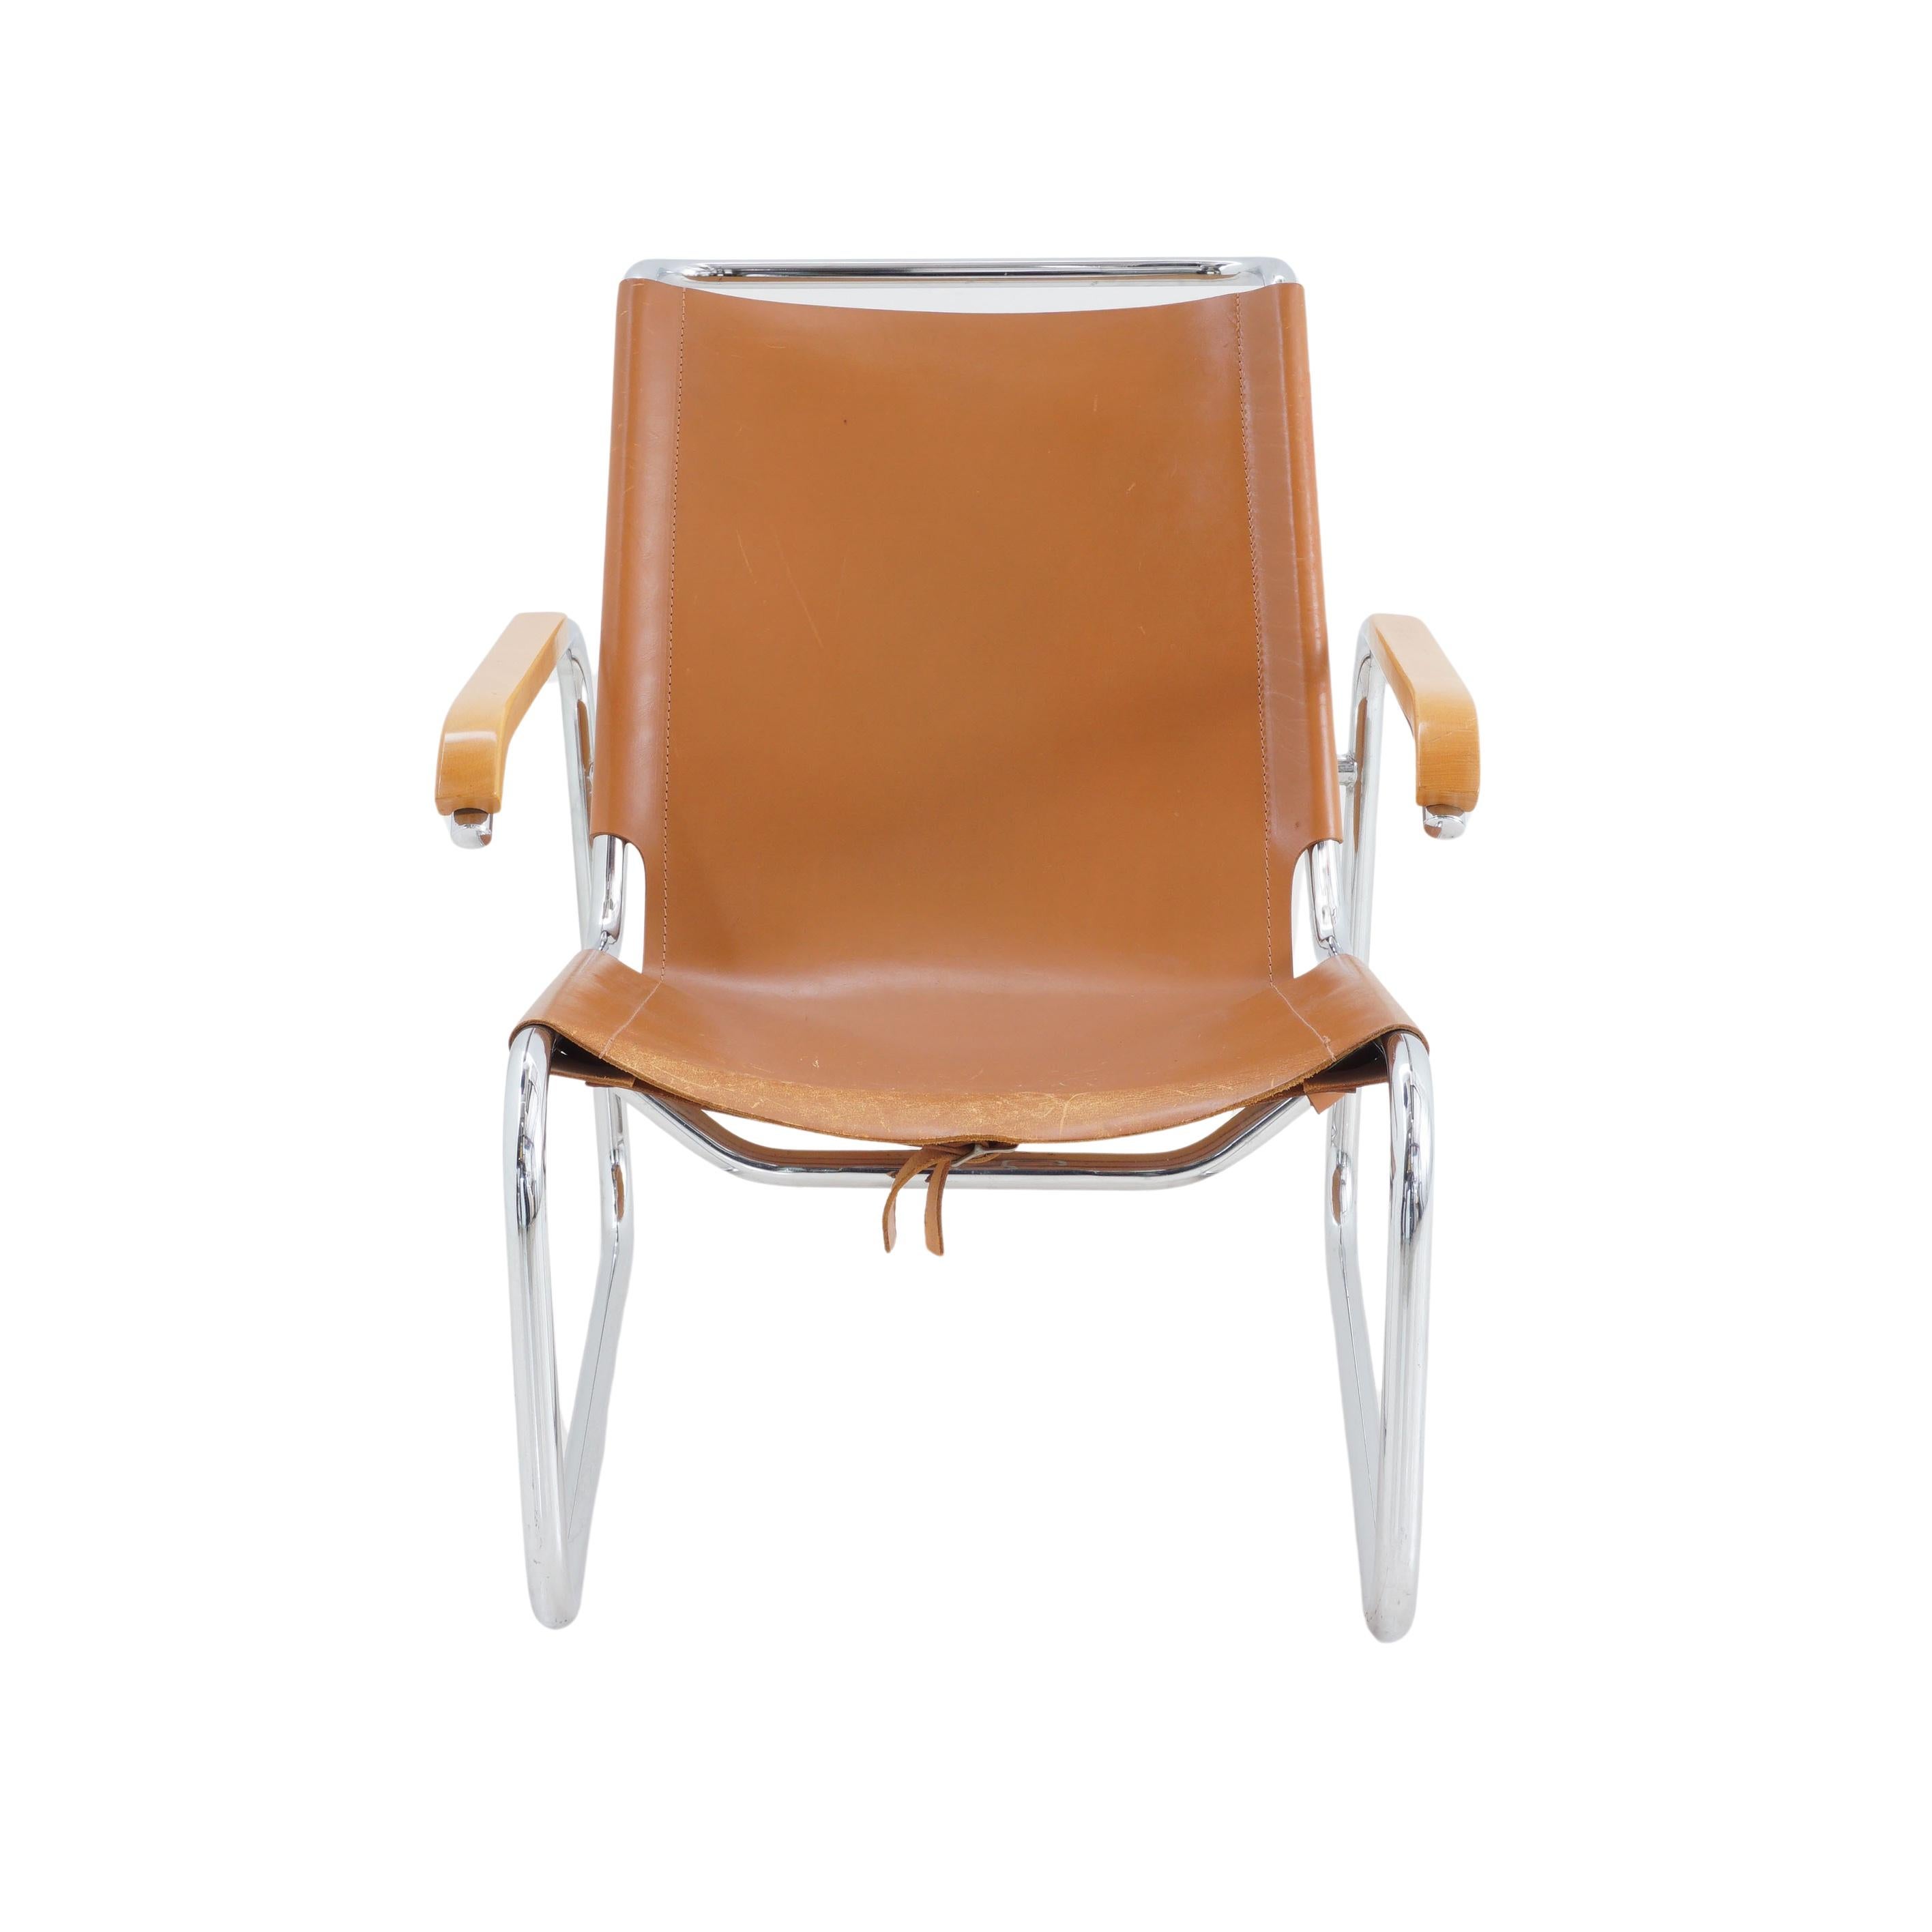 Let's talk about this Marcel Breuer Sling Lounge Chair from the 1930s, shall we? It's got thick cognac leather that's like the perfectly aged skin of a Hollywood starlet, and it reclines as you lean back, because it's polite and knows how to treat a